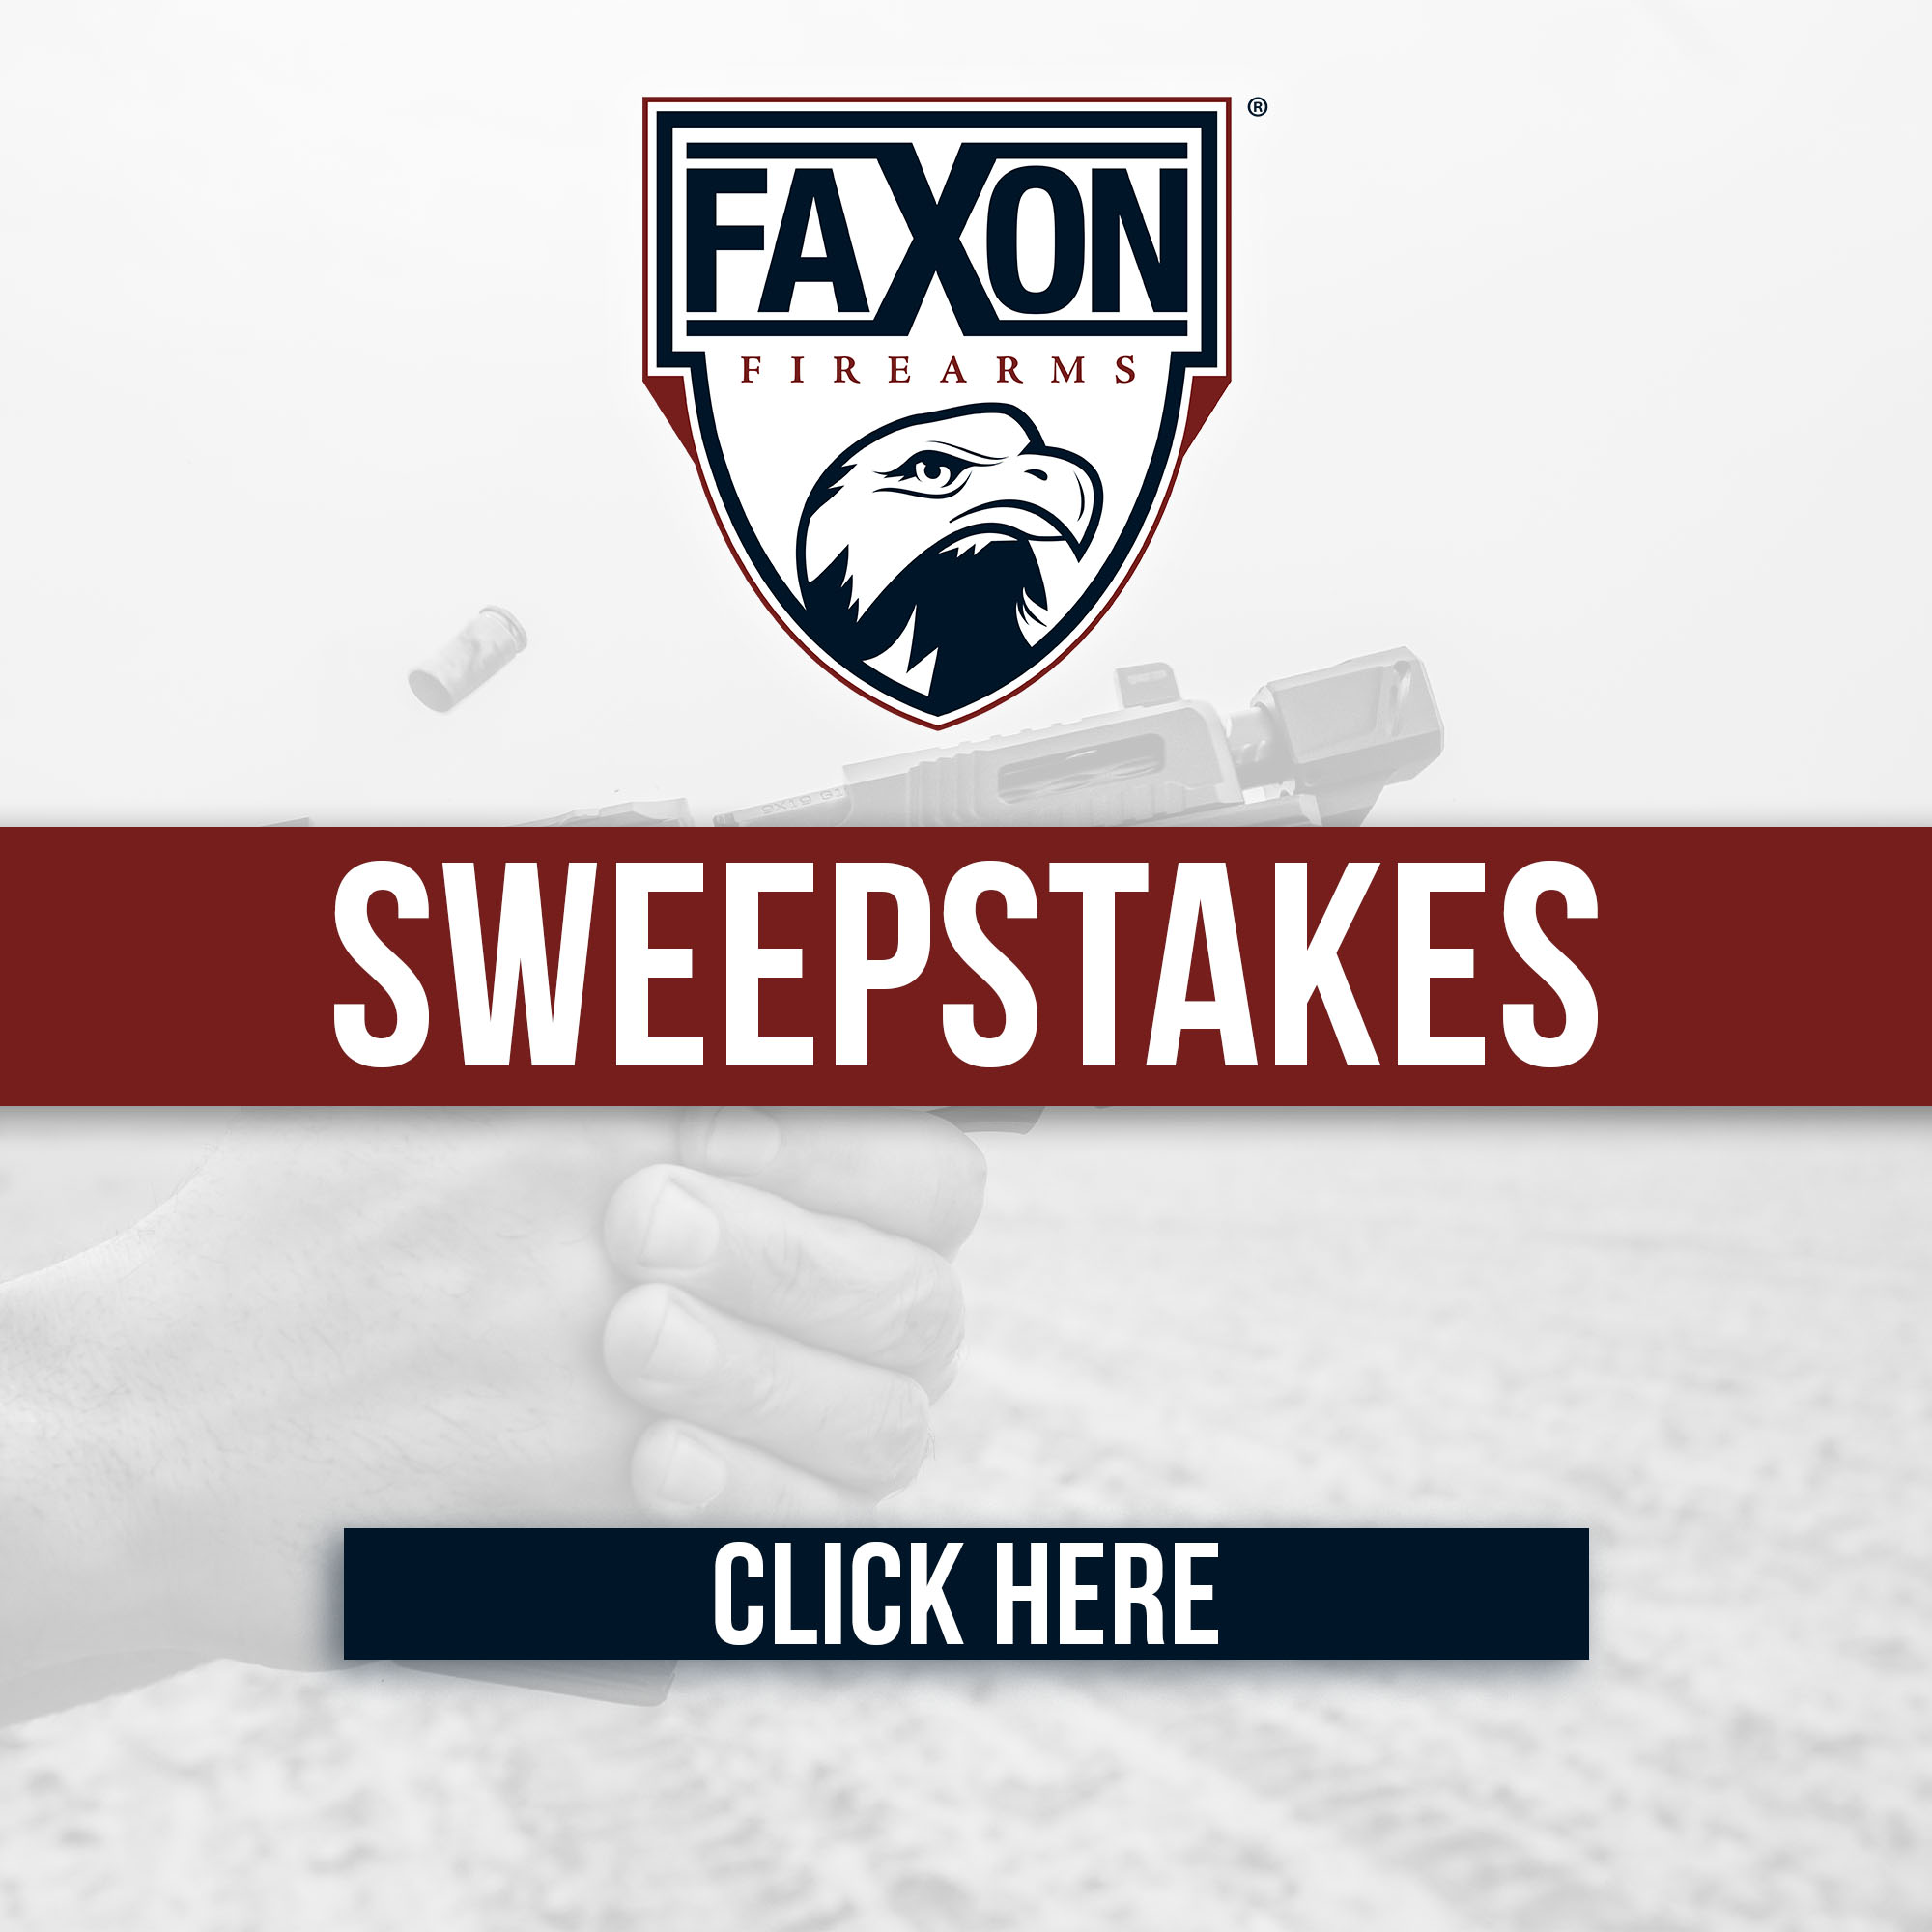 Link to Faxon Firearms Sweepstakes